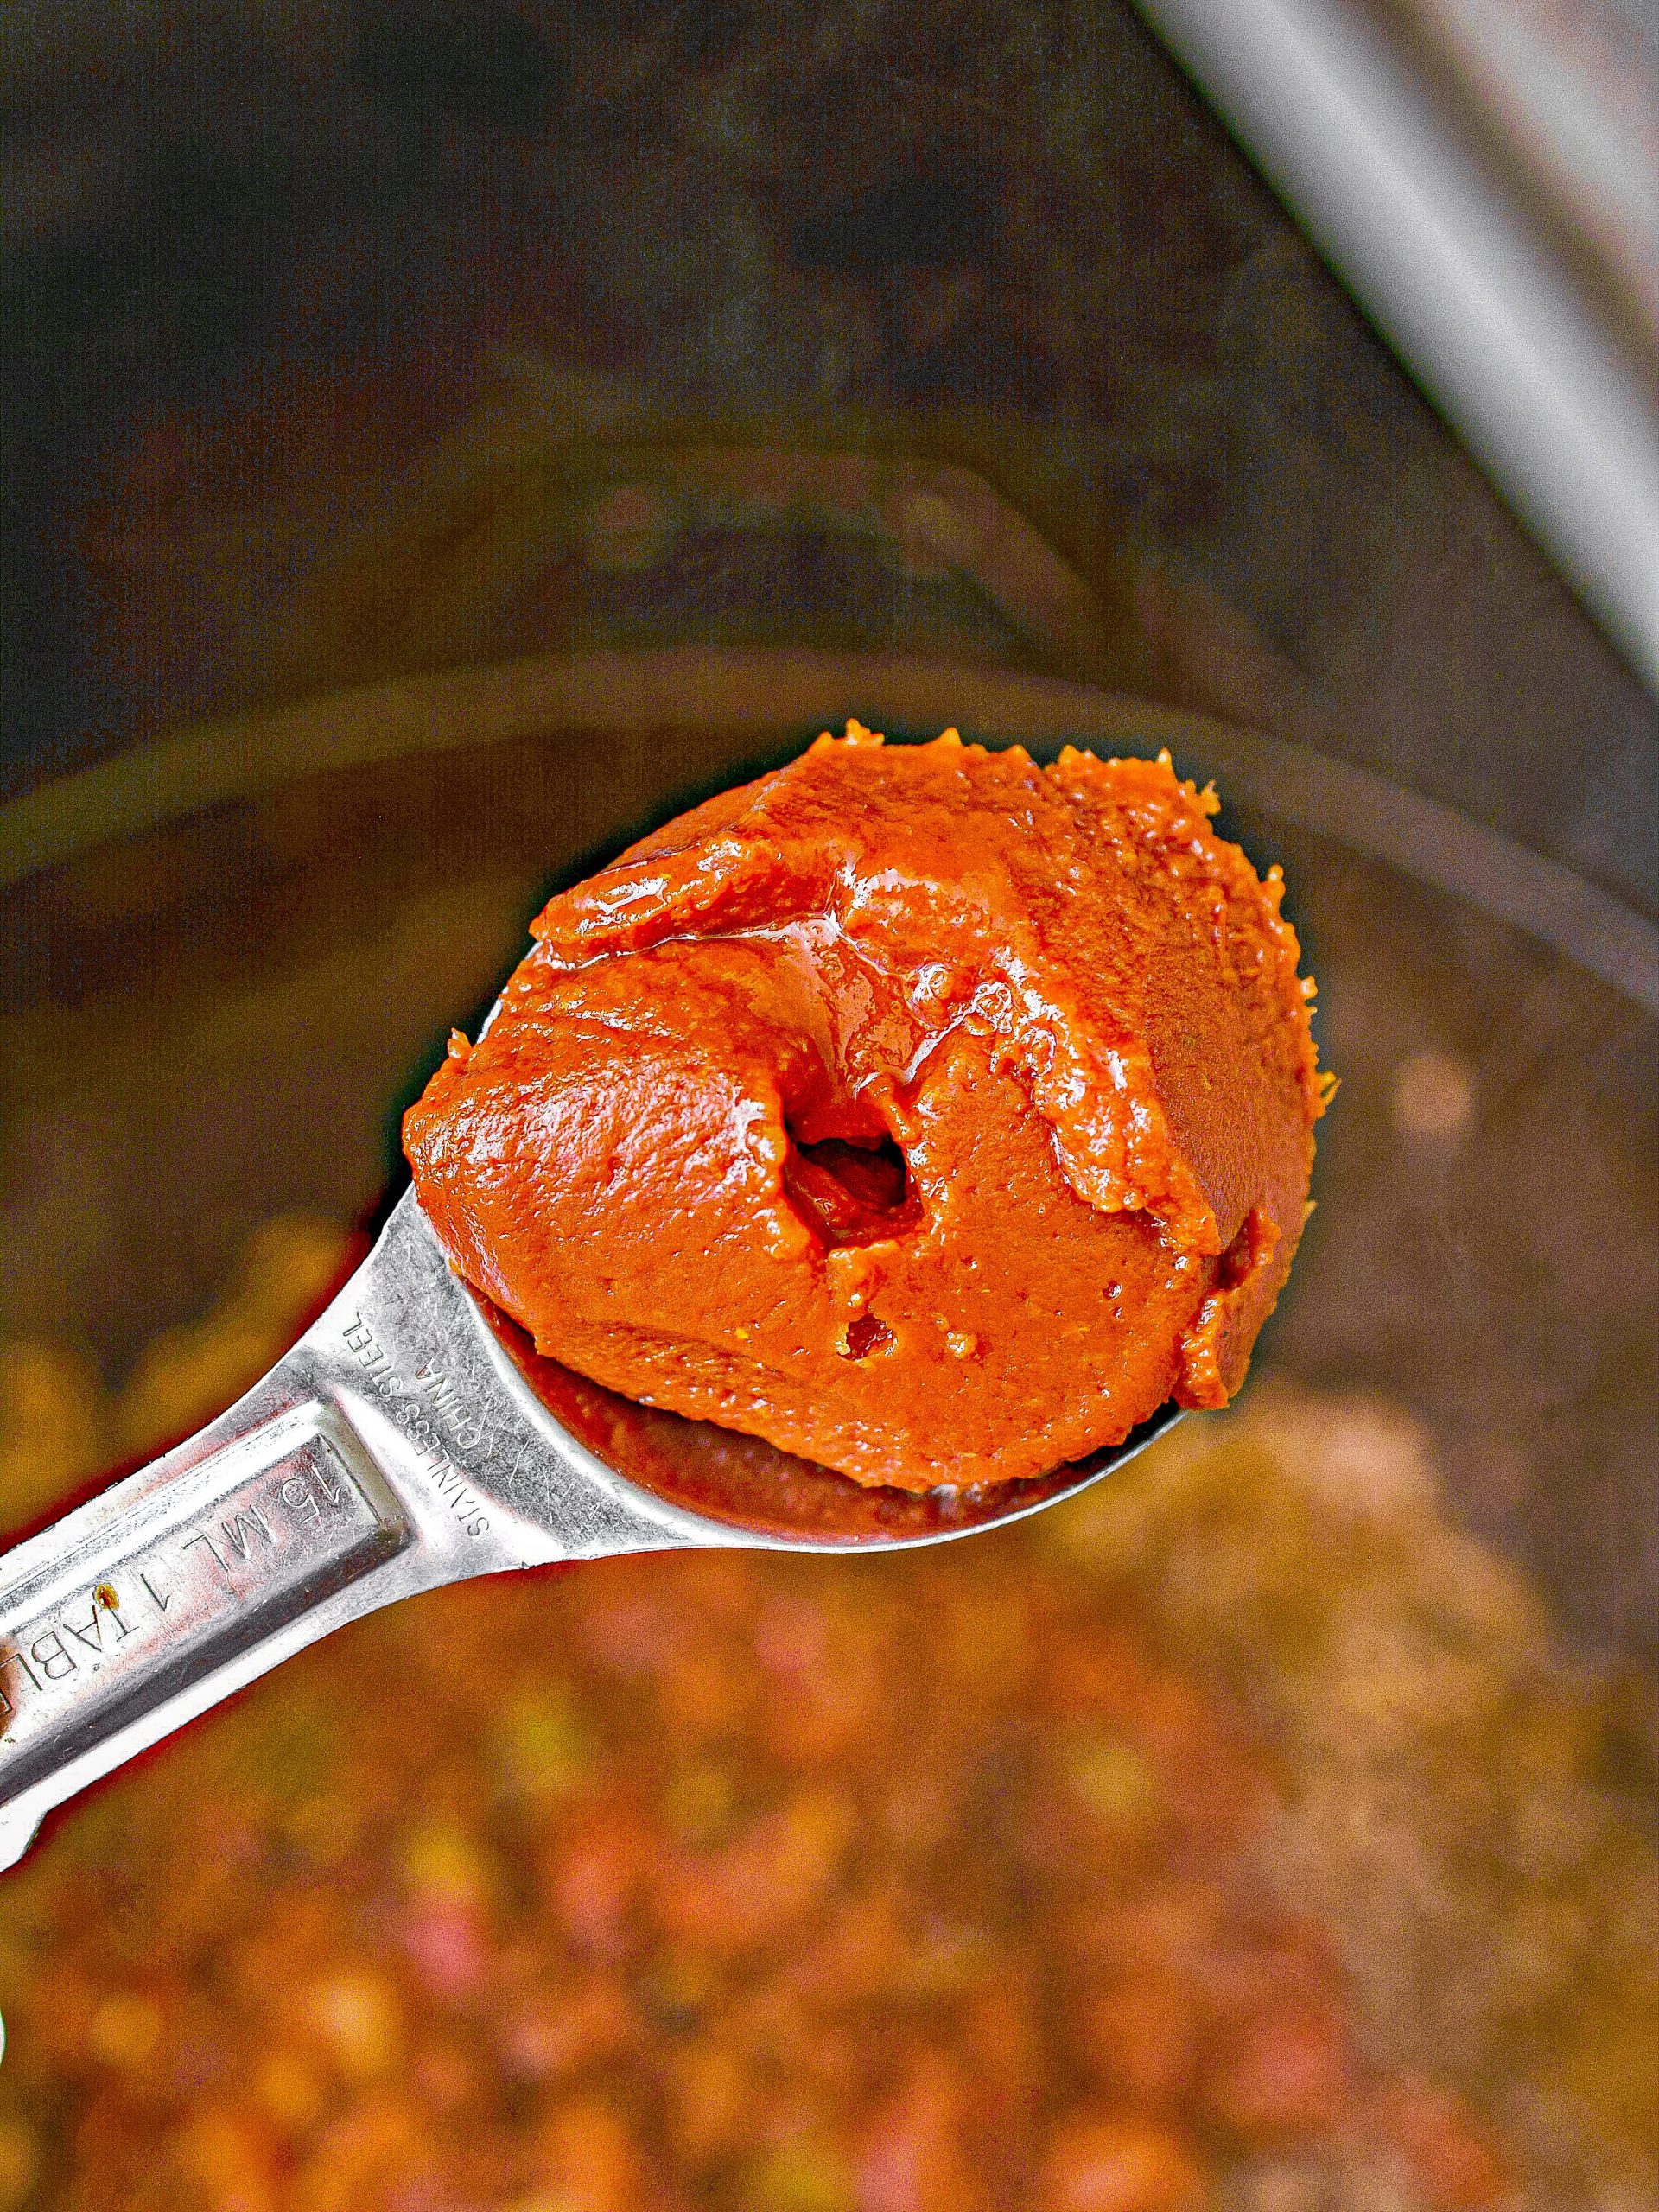 add 2 tbsp tomato paste into the skillet with the meat and stir to combine well.